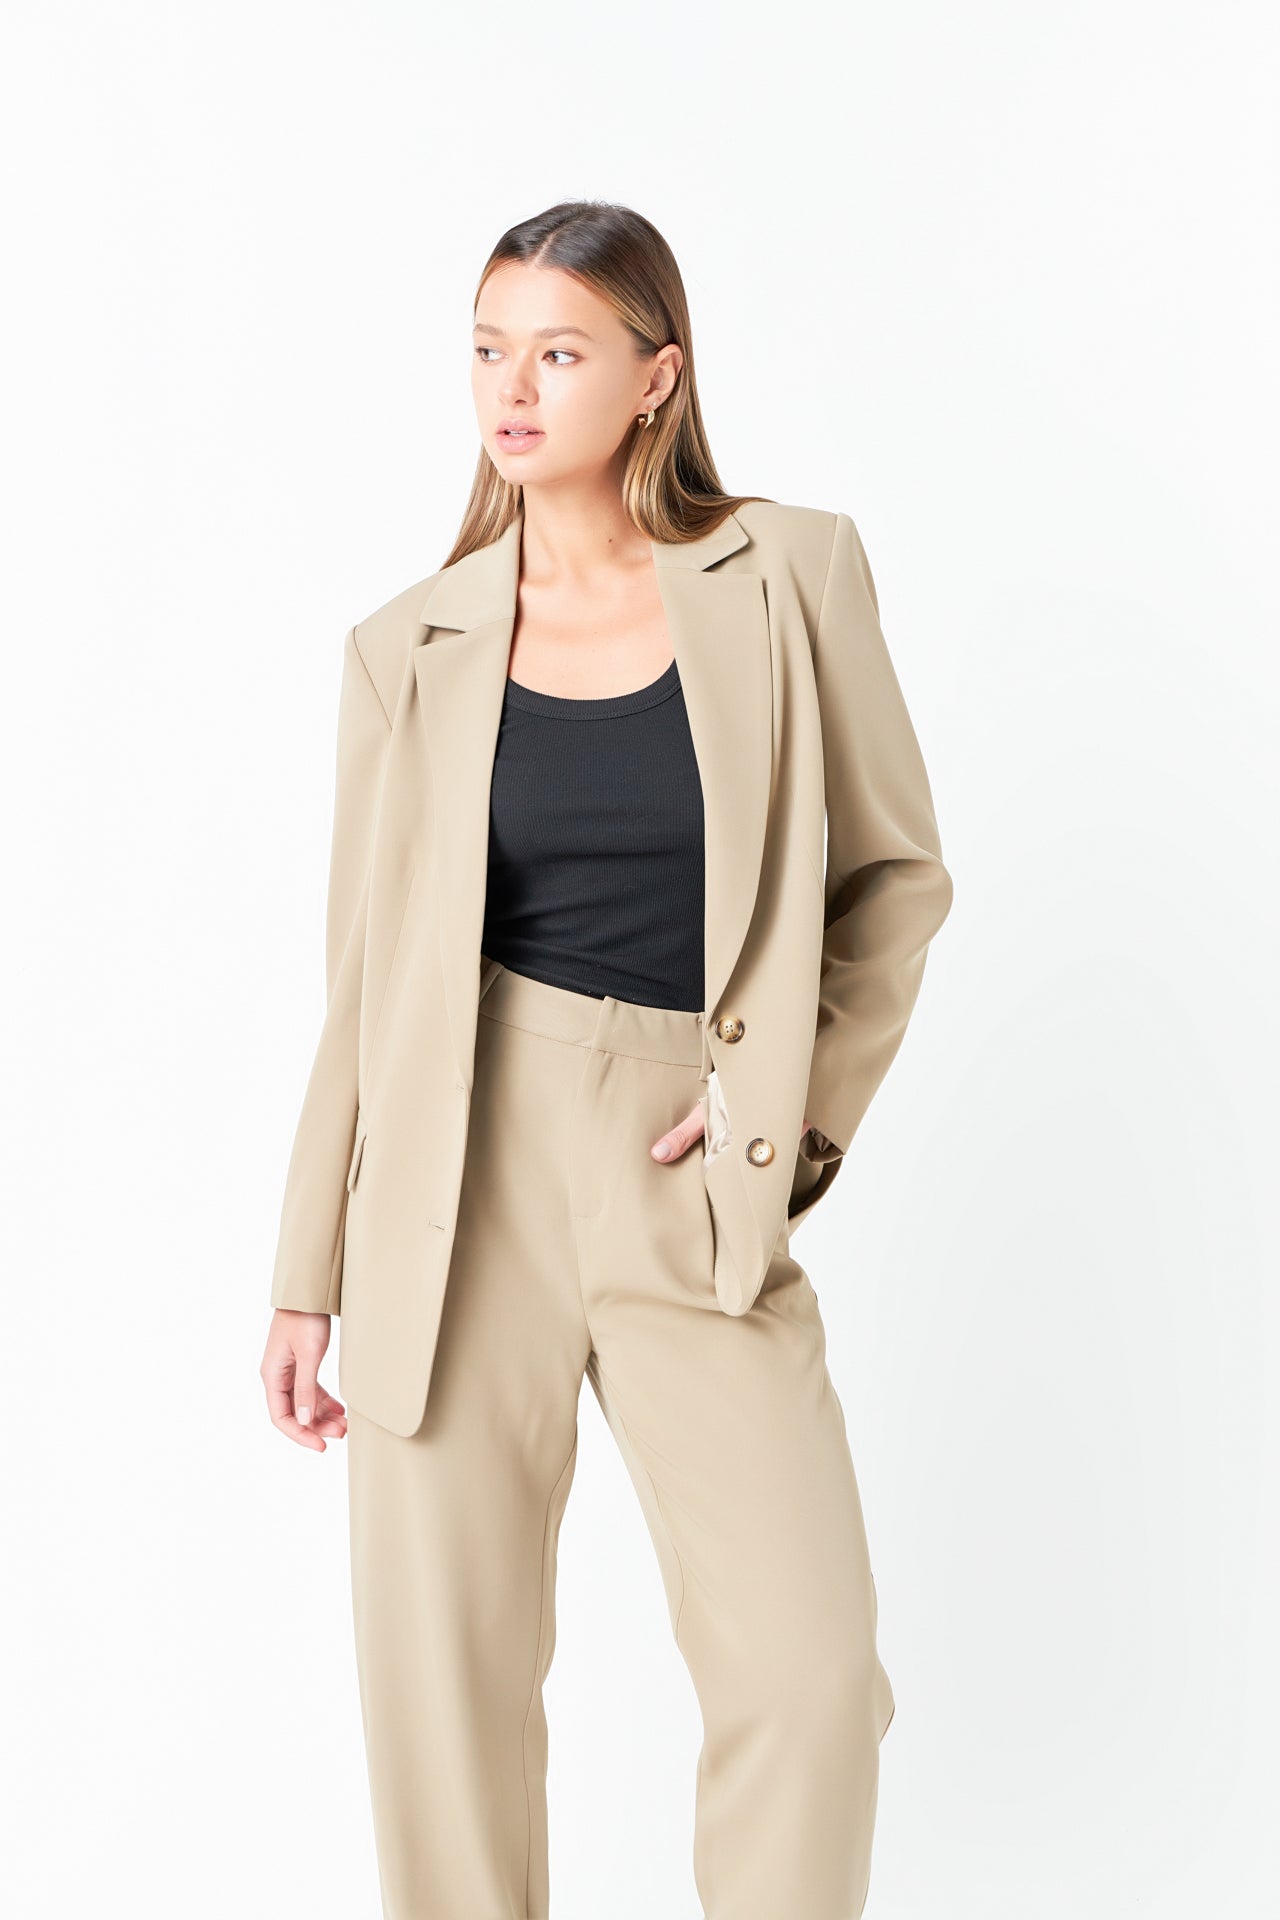 GREY LAB - Single Breasted Oversized Blazer - BLAZERS available at Objectrare